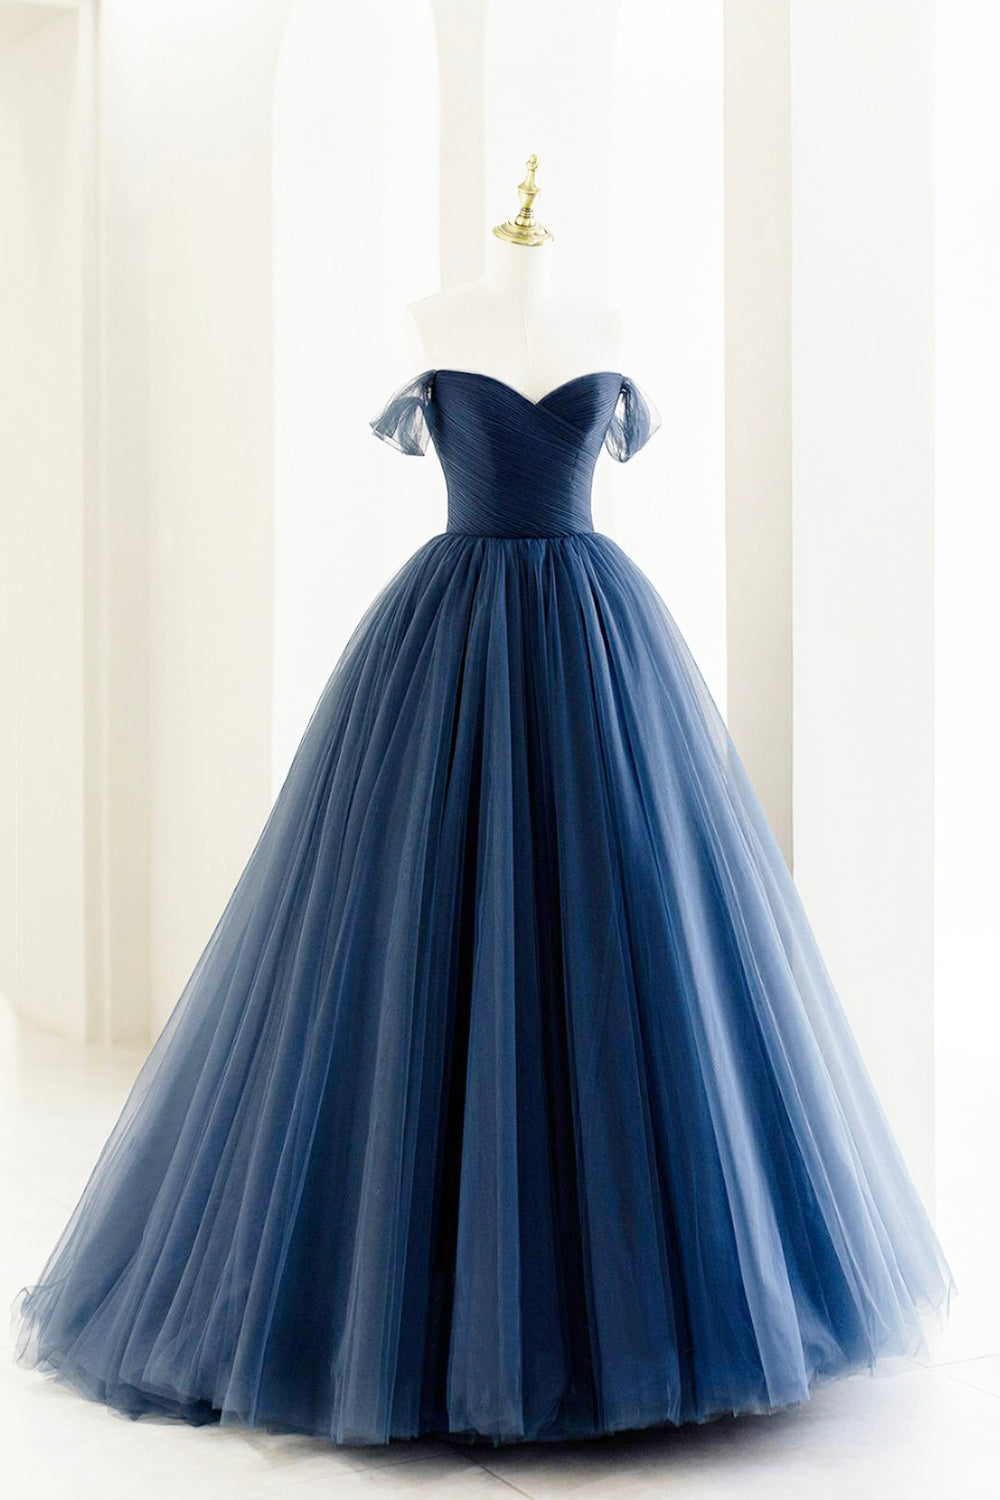 Bridesmaid Dress Red, Blue Tulle Long A-Line Prom Dress, Off the Shoulder Formal Evening Dress